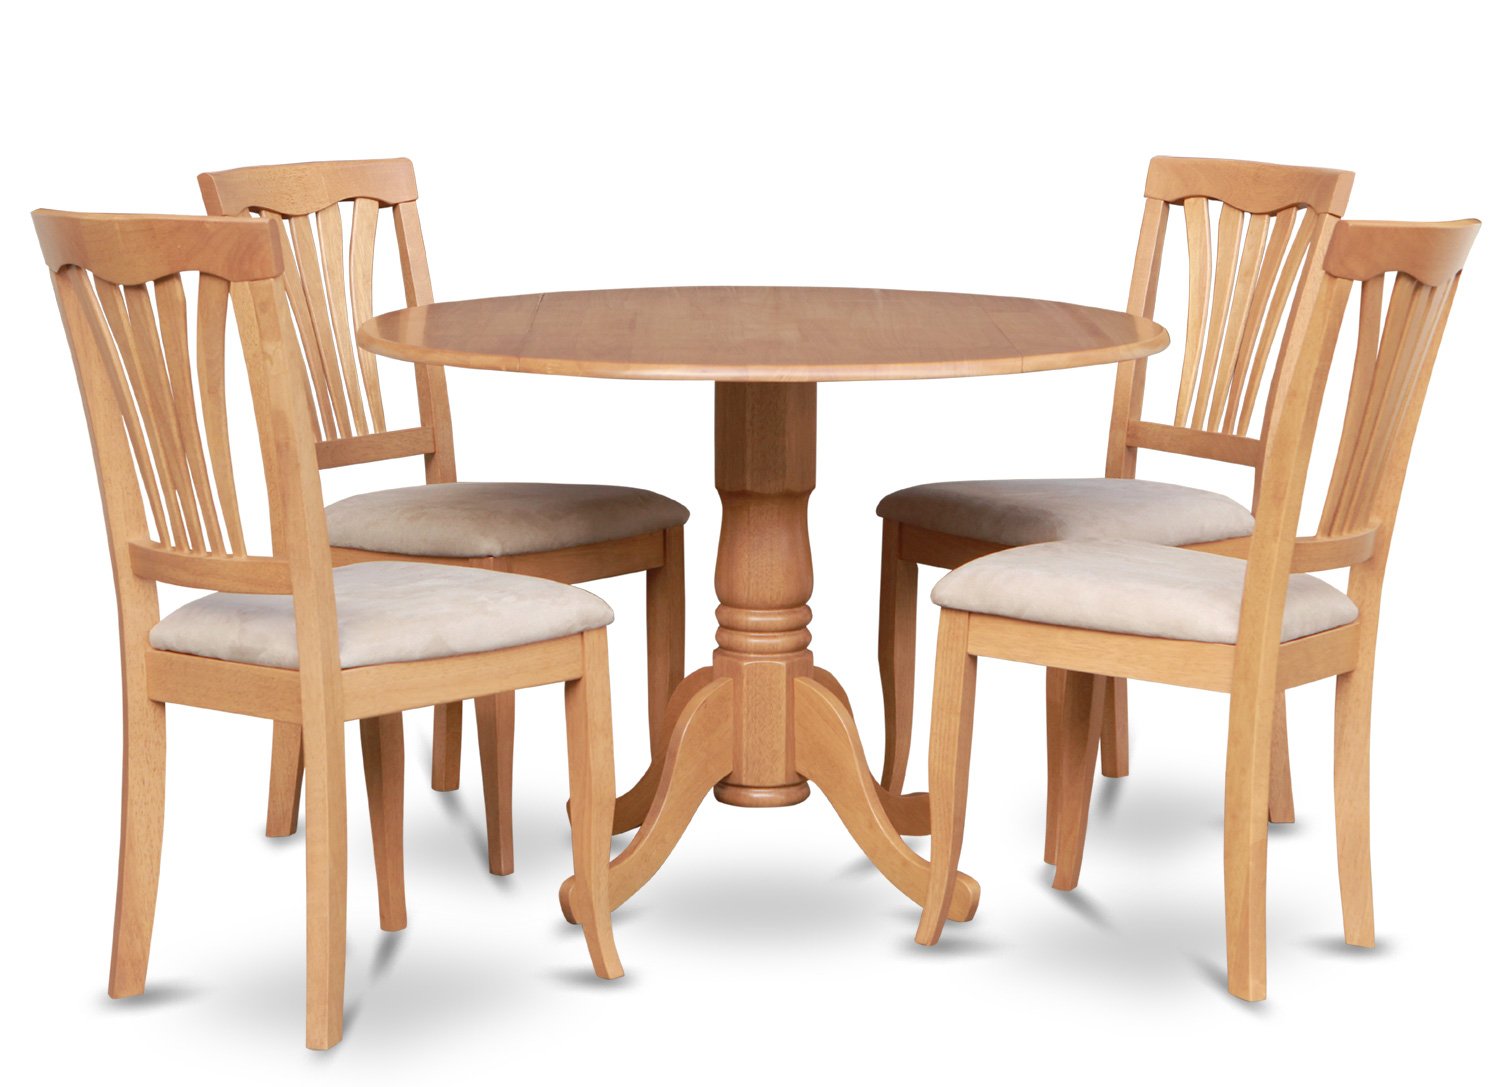 Round Wooden Chairs With Cushions  : To Choose A Fabric Please Go To: